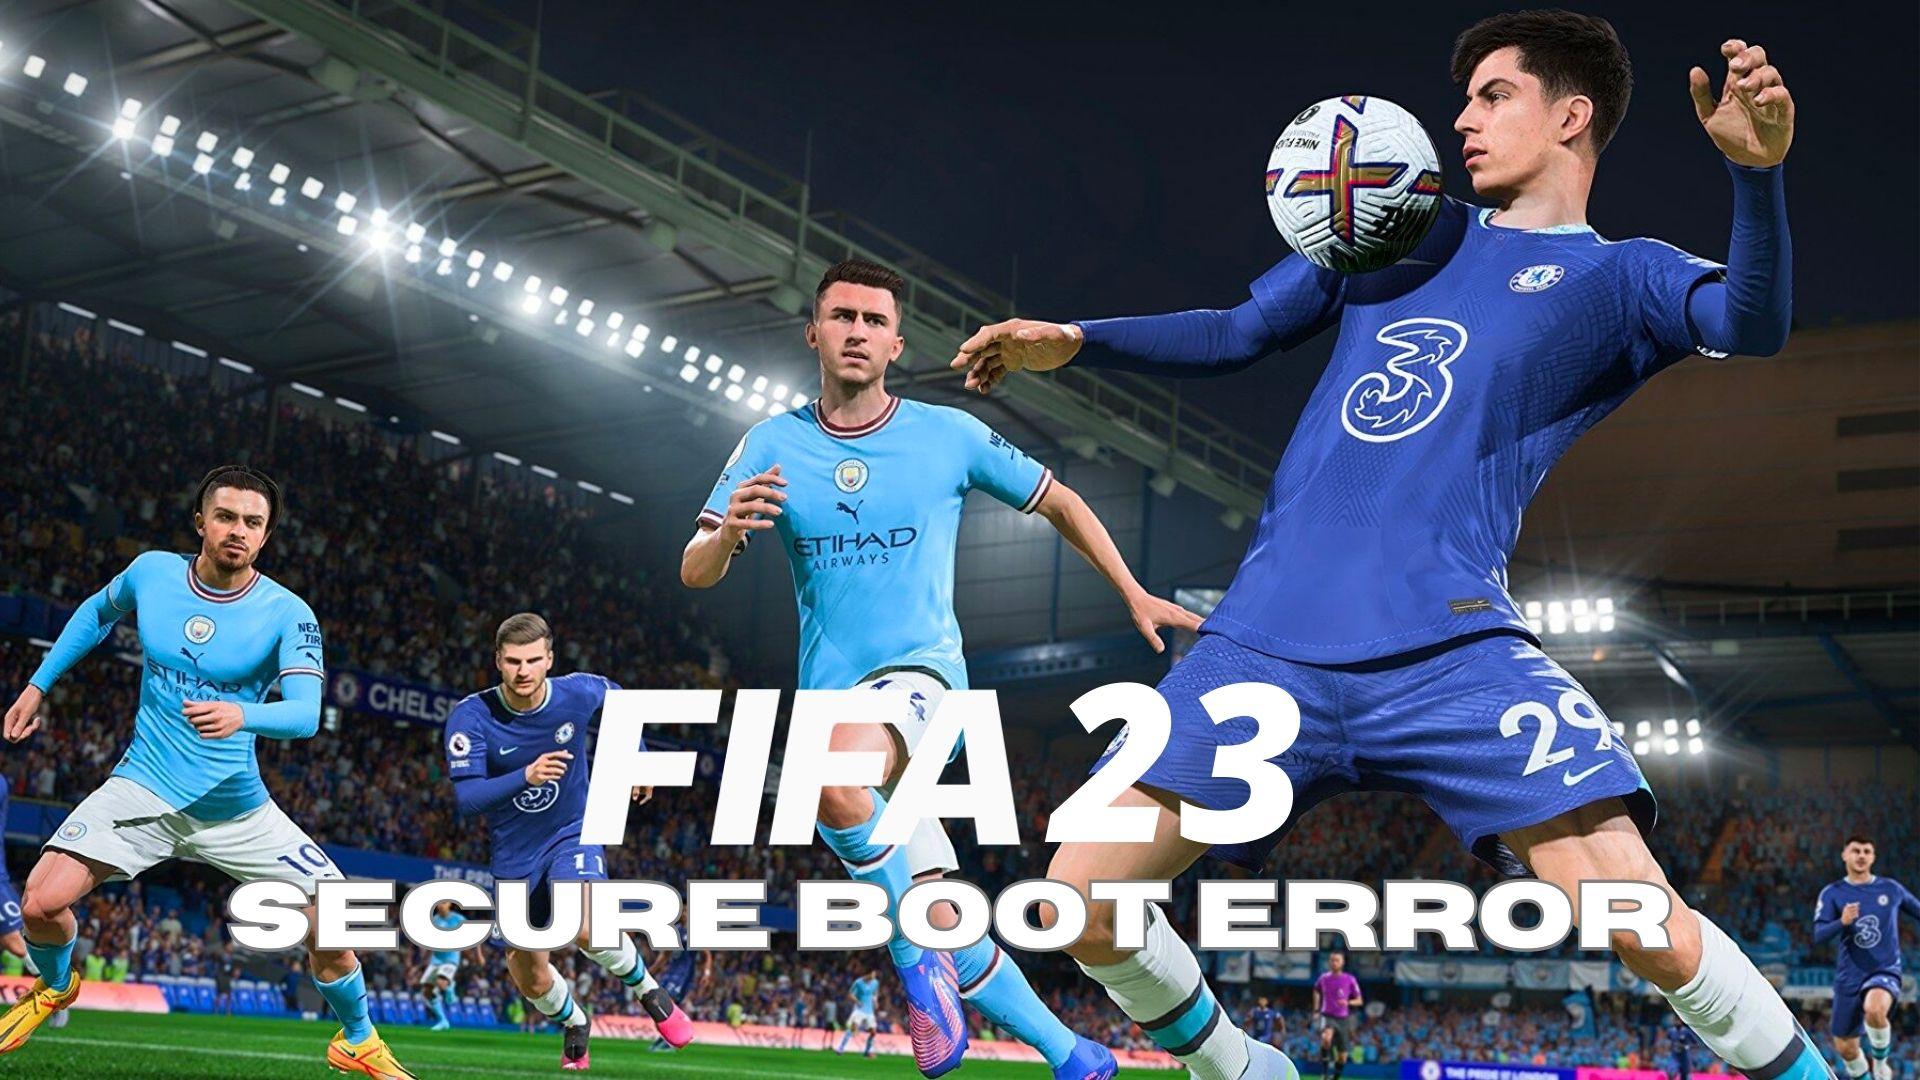 Manchester City vs chelsea game in FIFA 23 with secure boot error message